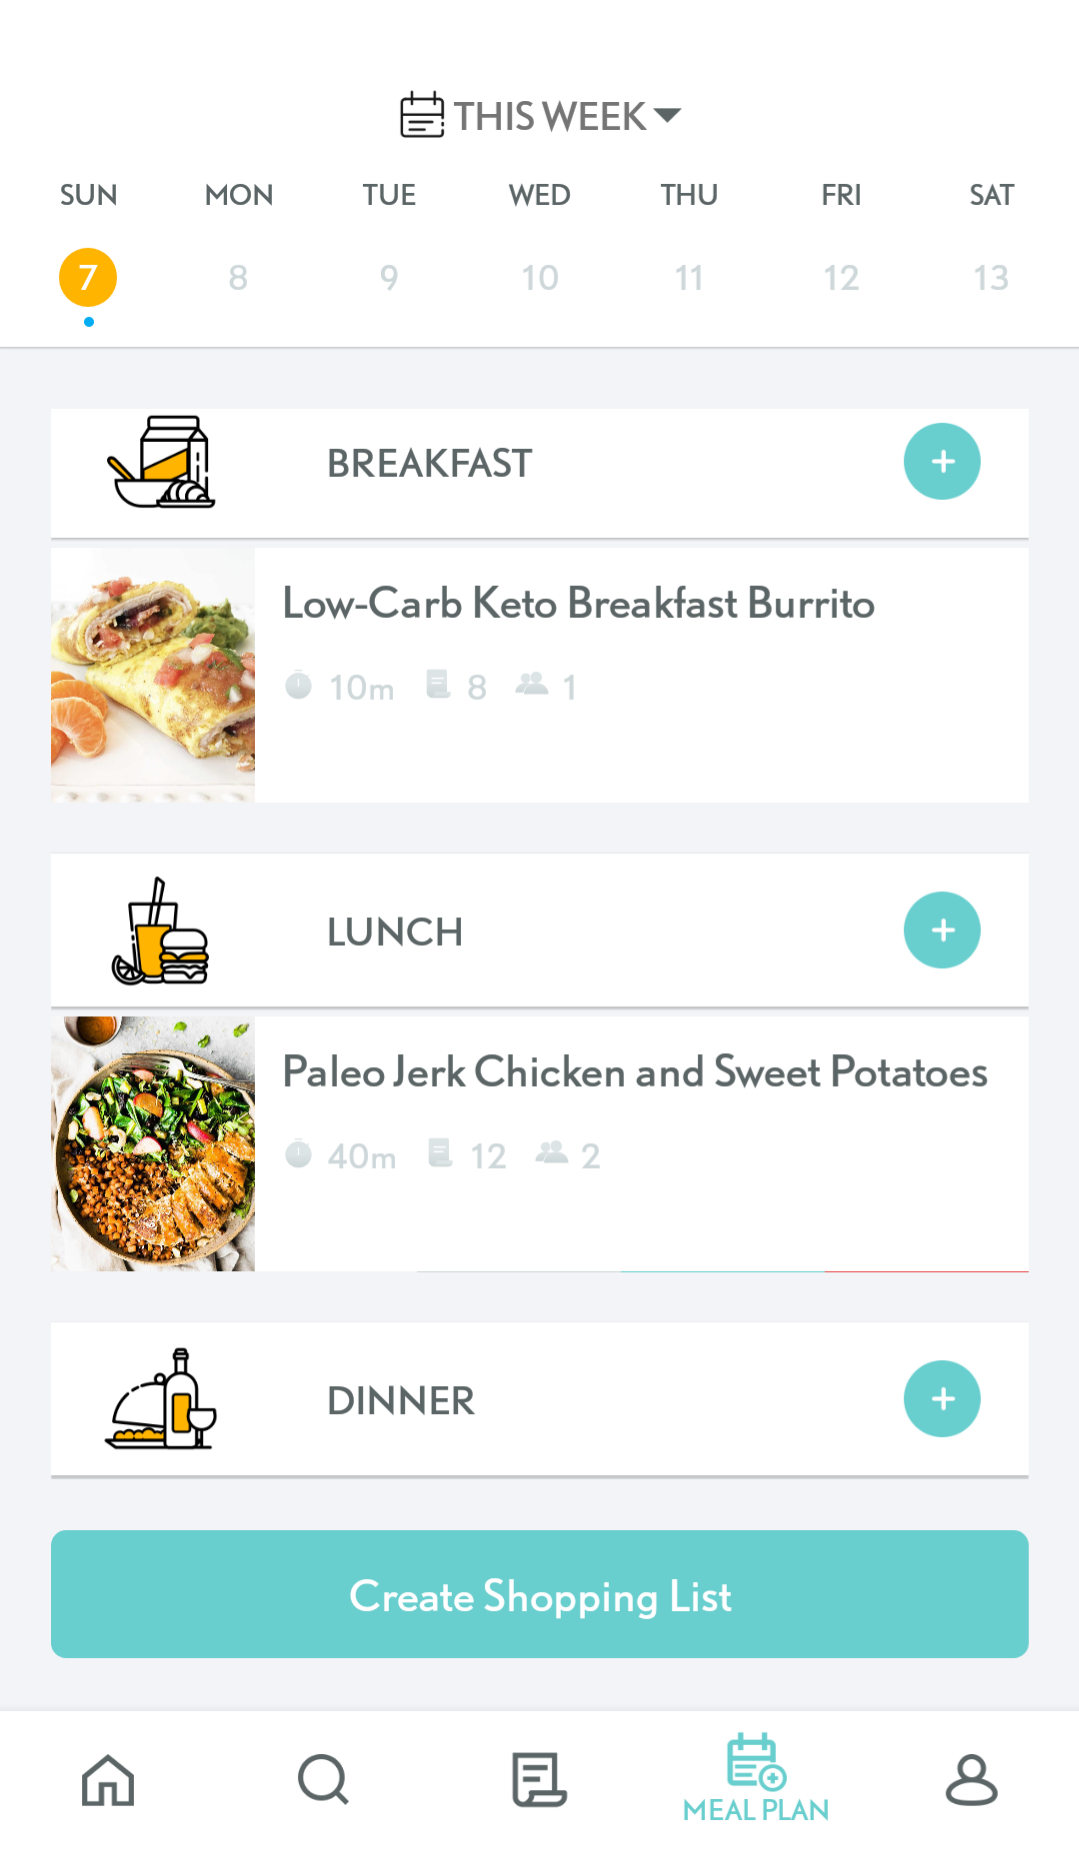 Sidechef makes meal planning on mobiles easy